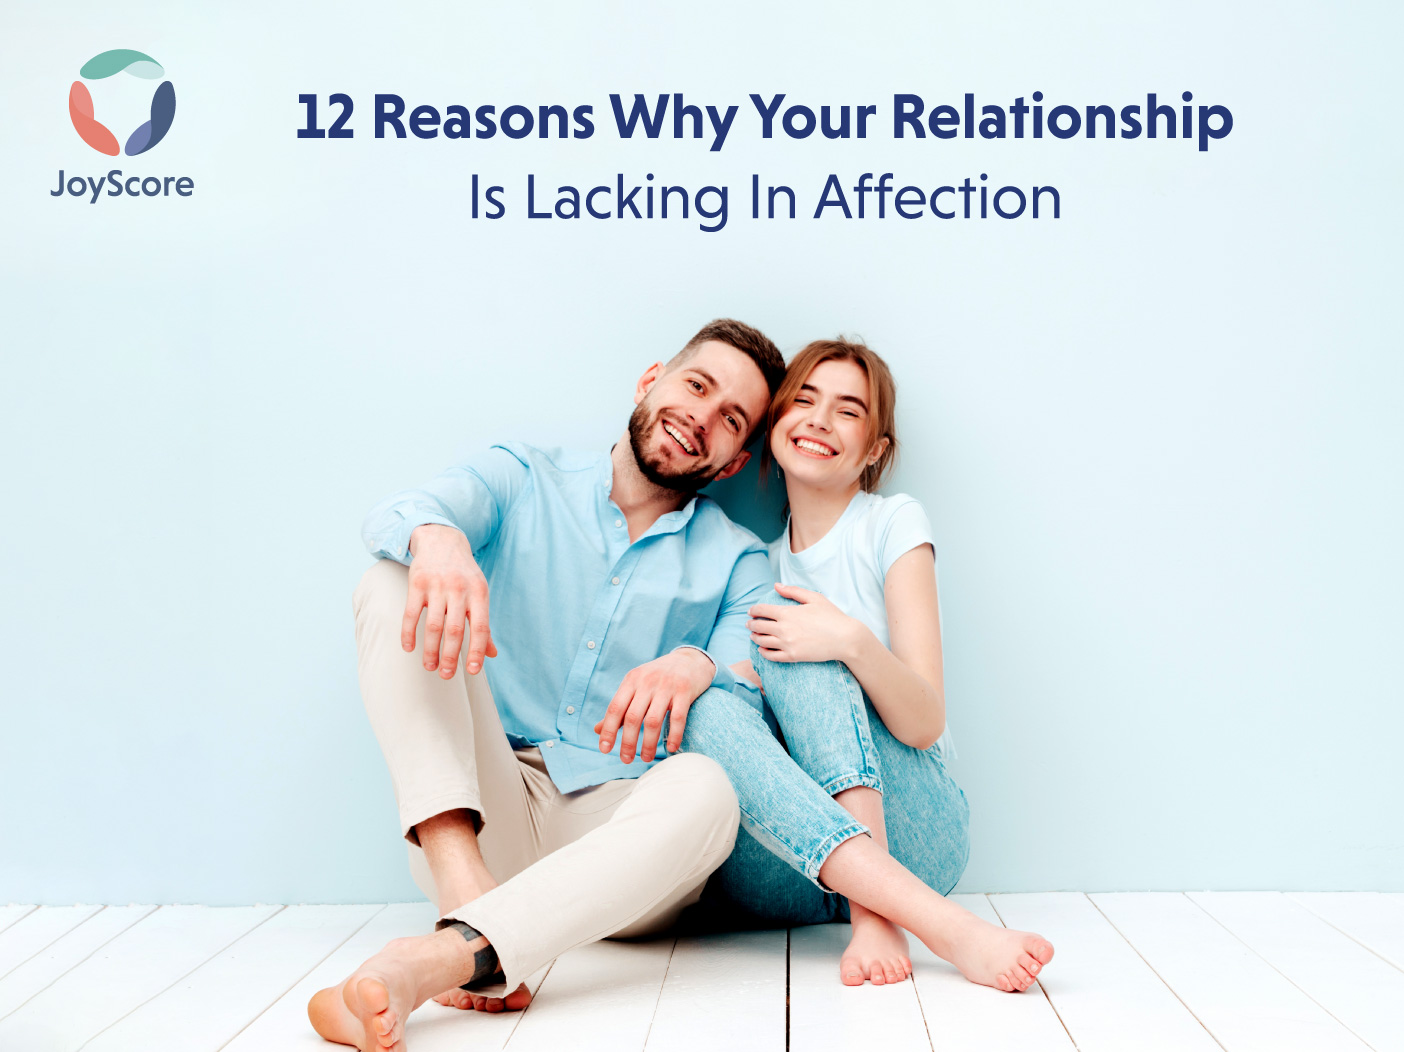 12 Reasons Behind the Lack of Affection in a Relationship